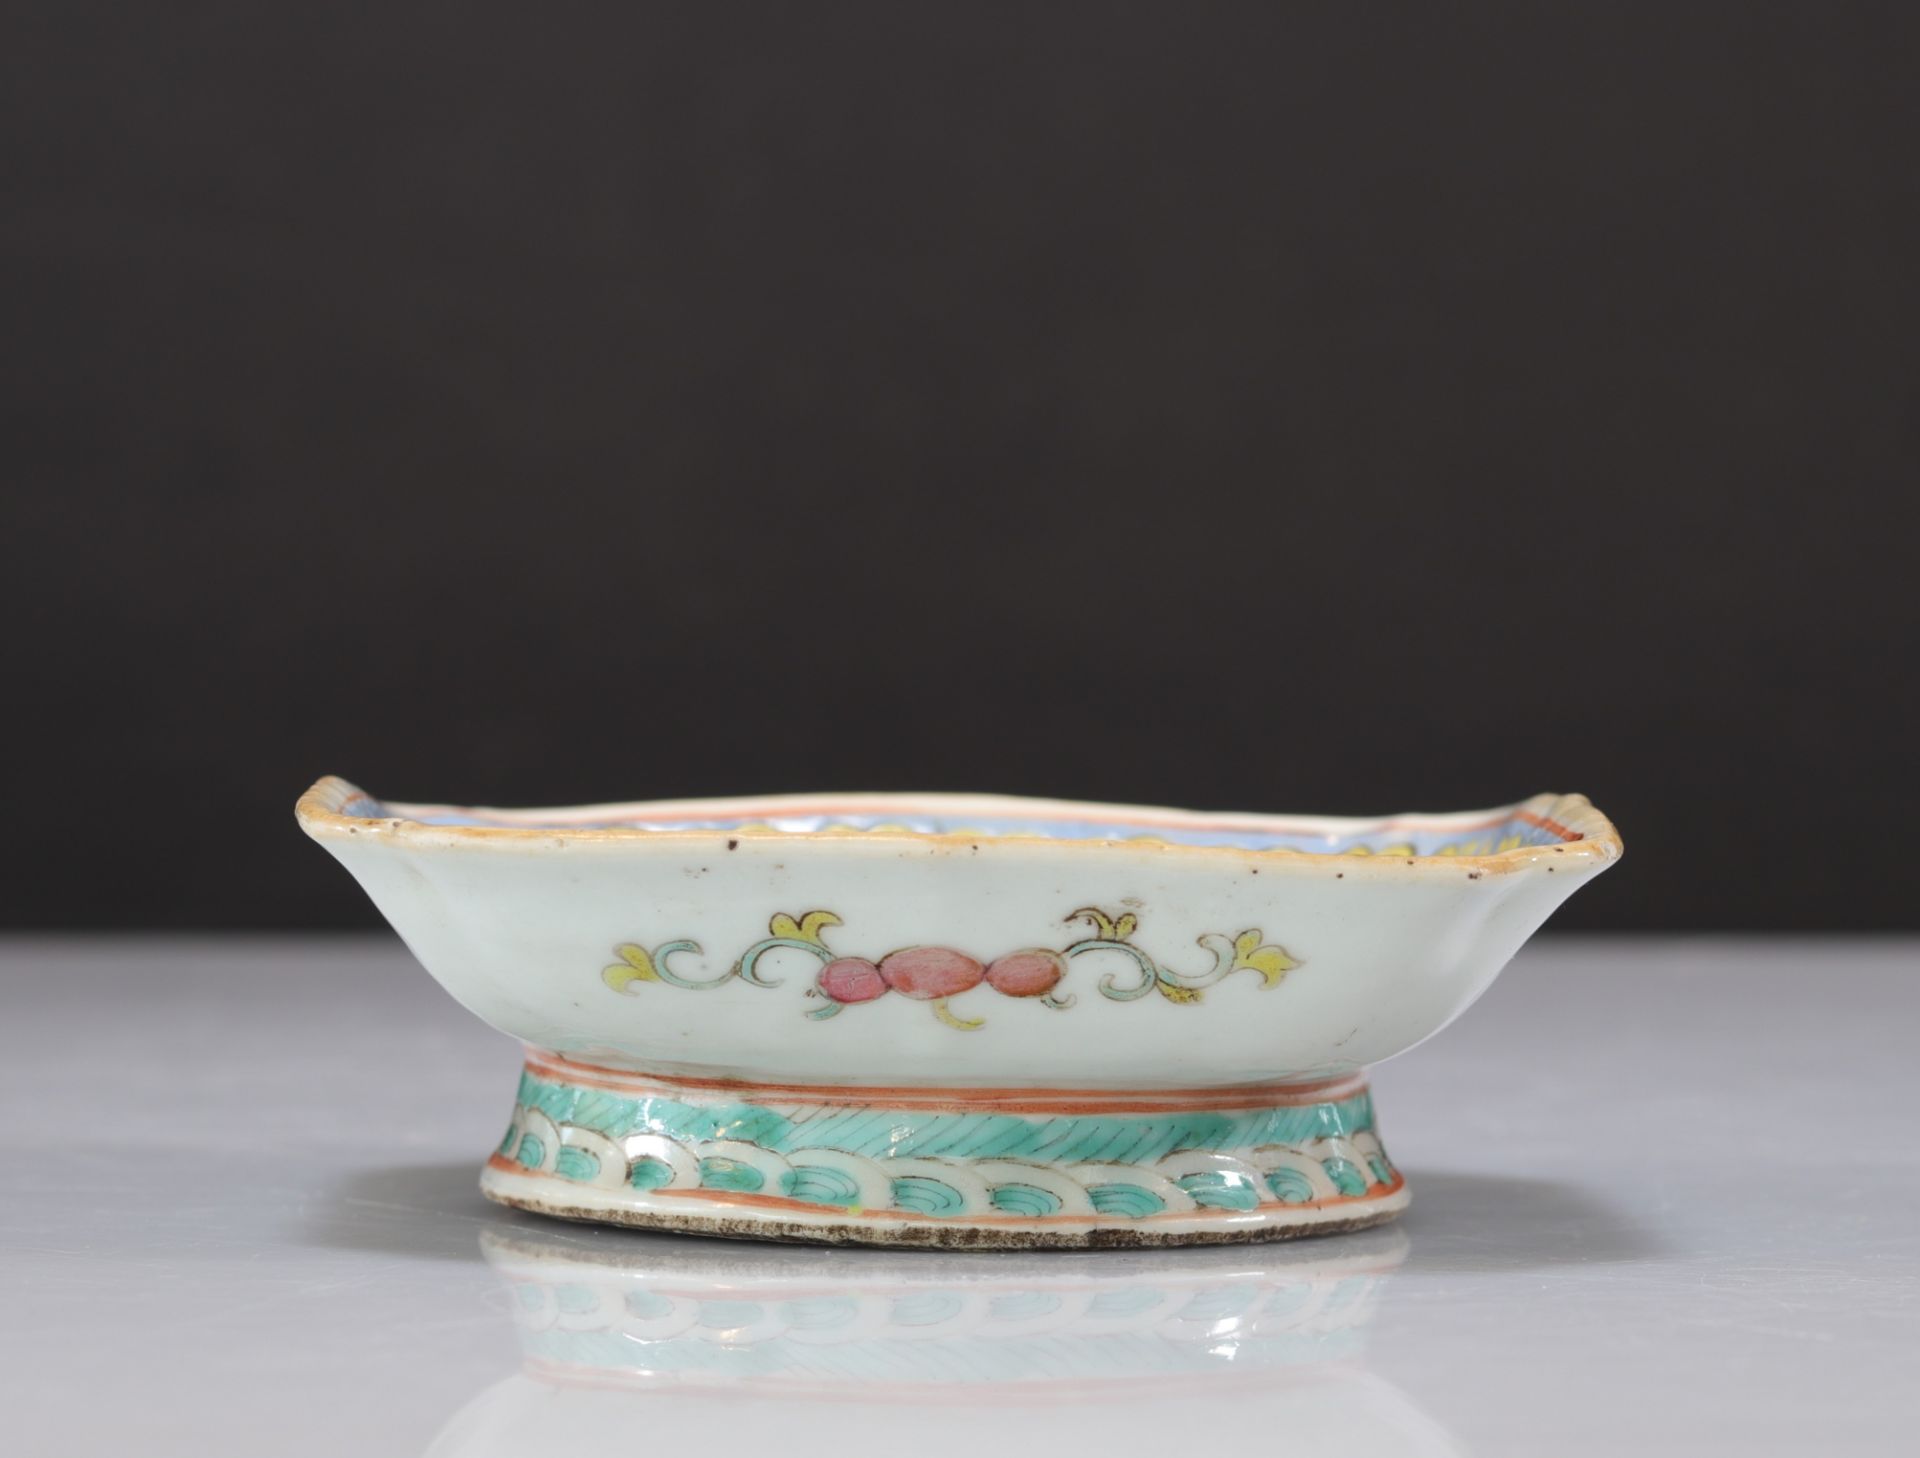 Famille rose porcelain dish with yellow background - Image 5 of 6